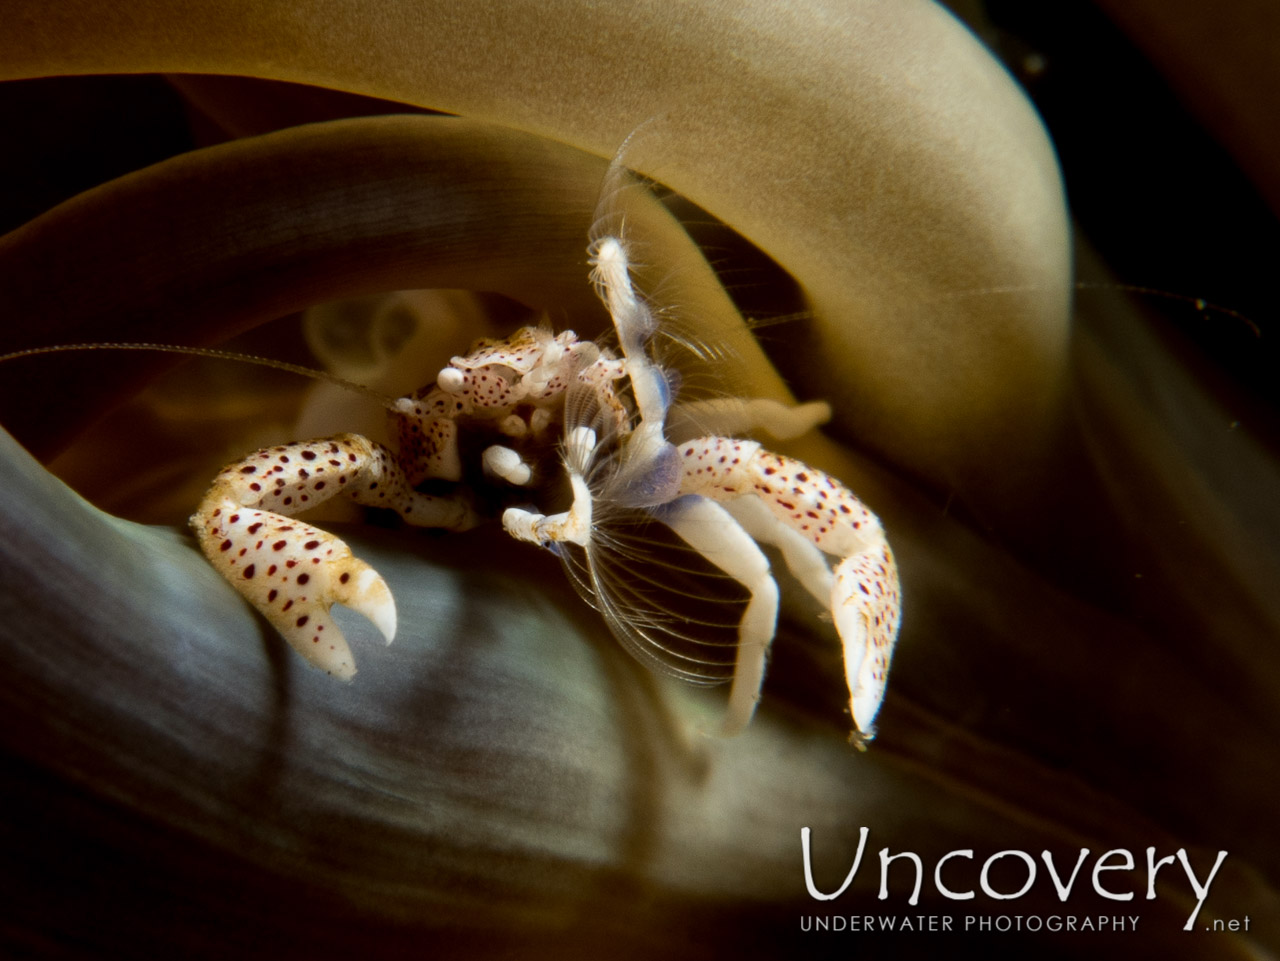 Spotted Porcelain Crab (neopetrolisthes Maculatus), photo taken in Indonesia, North Sulawesi, Lembeh Strait, Nudi Falls